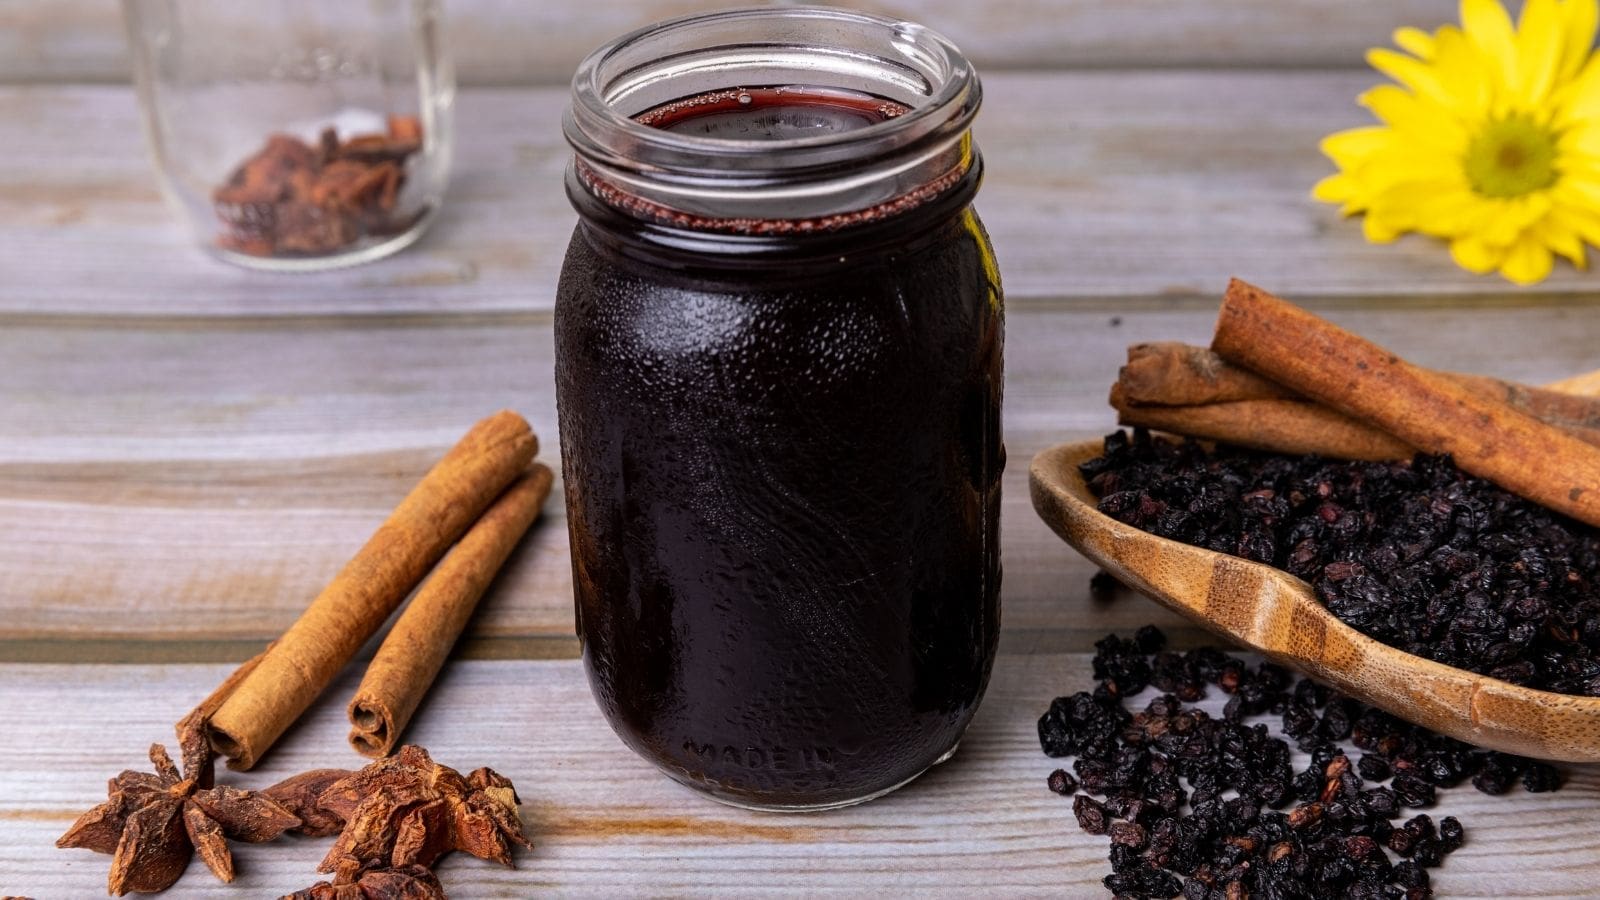 Recipe with your own dried elderberries